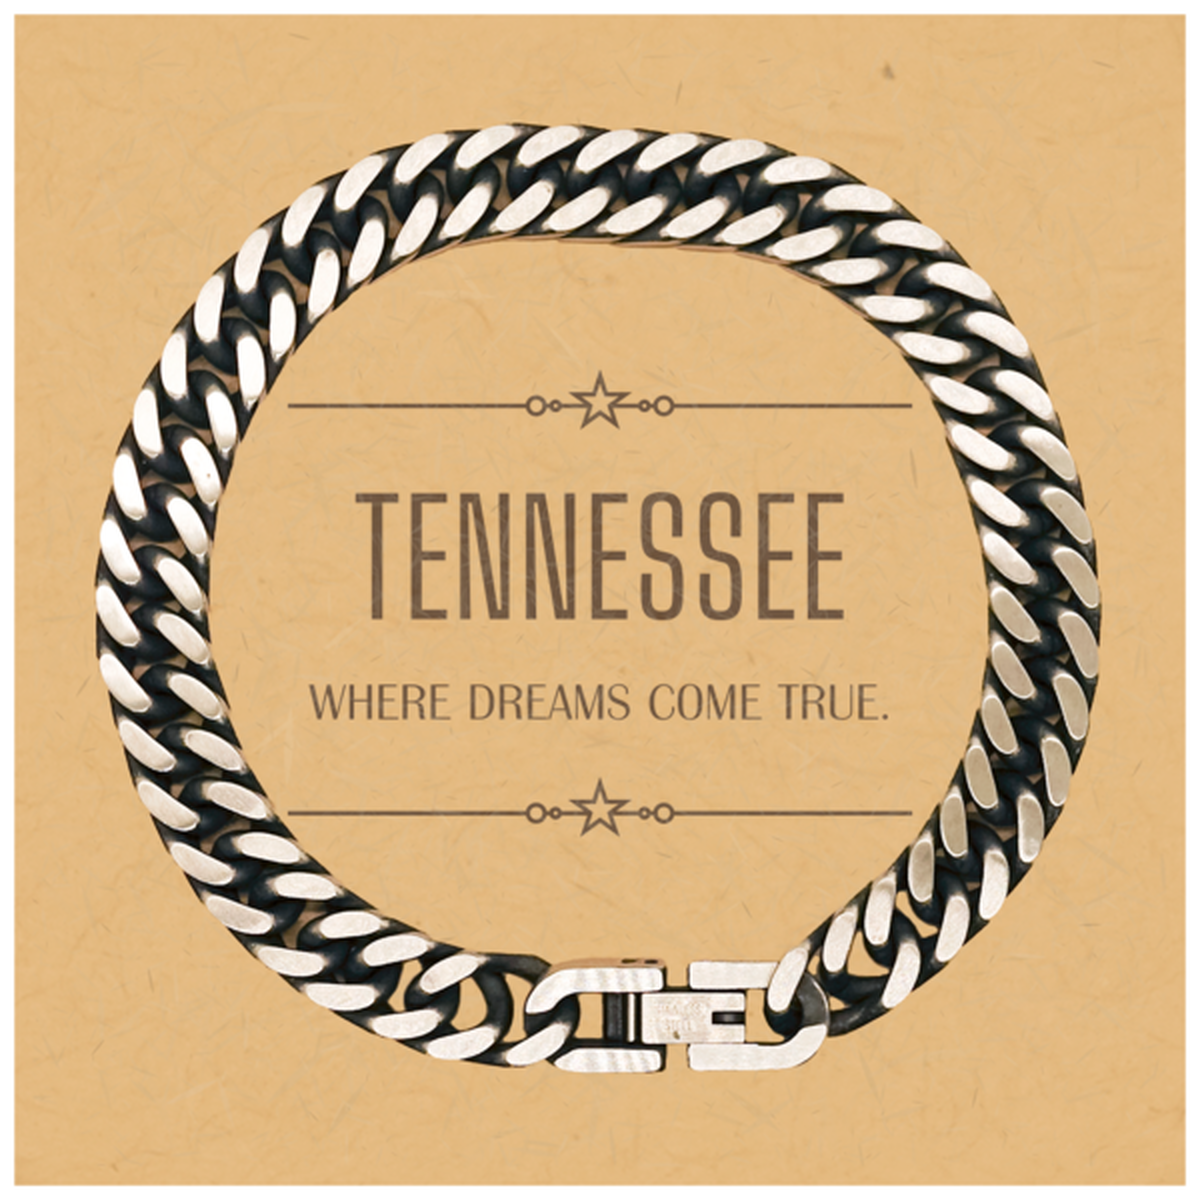 Love Tennessee State Cuban Link Chain Bracelet, Tennessee Where dreams come true, Birthday Christmas Inspirational Gifts For Tennessee Men, Women, Friends